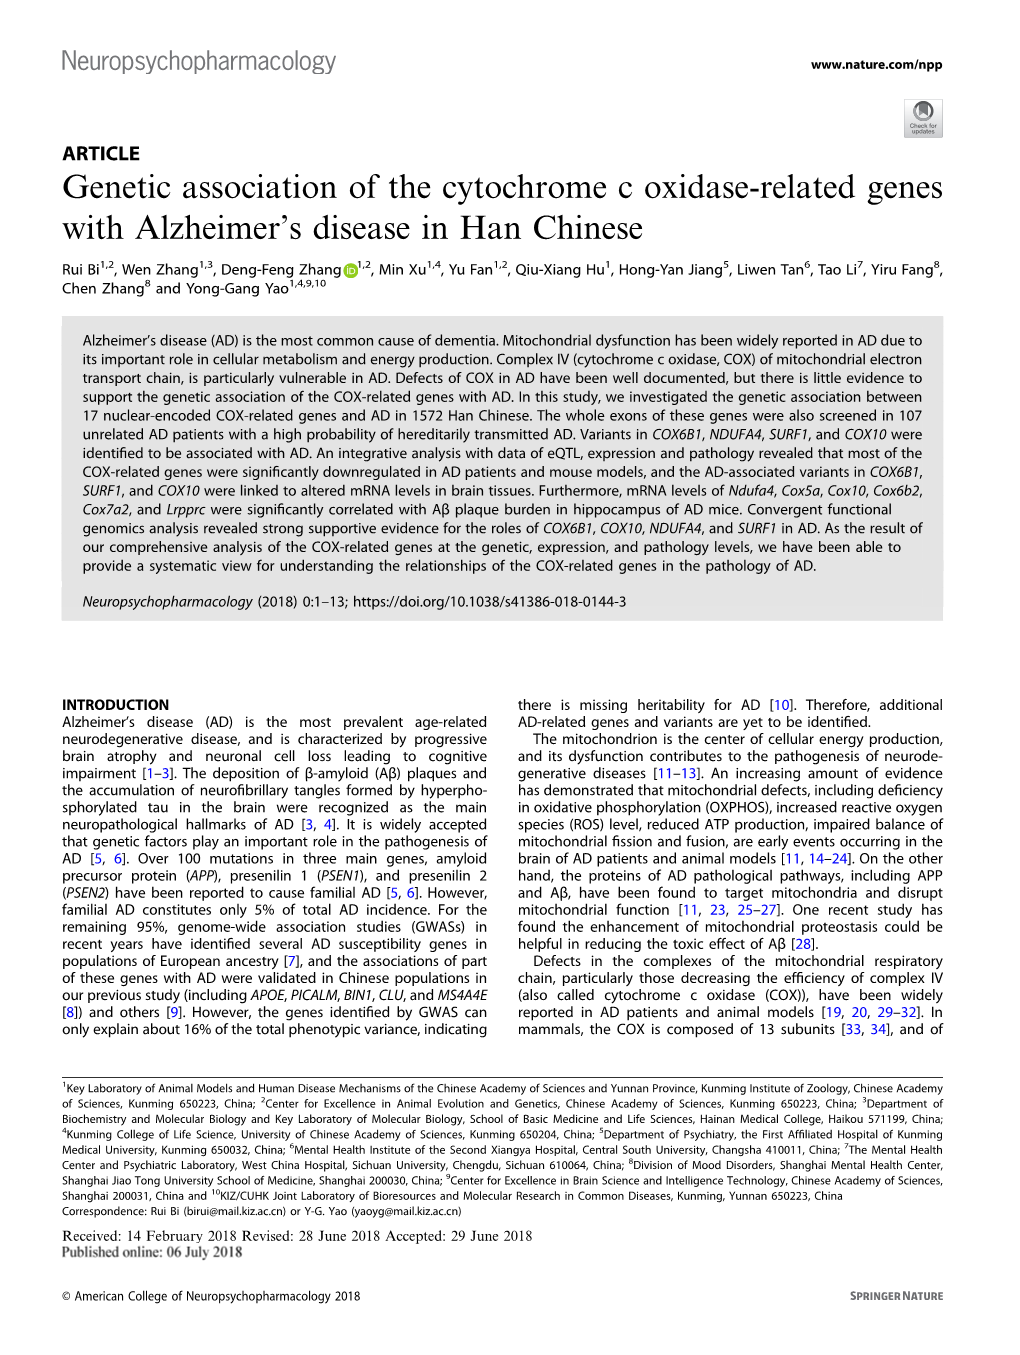 Genetic Association of the Cytochrome C Oxidase-Related Genes with Alzheimer’S Disease in Han Chinese